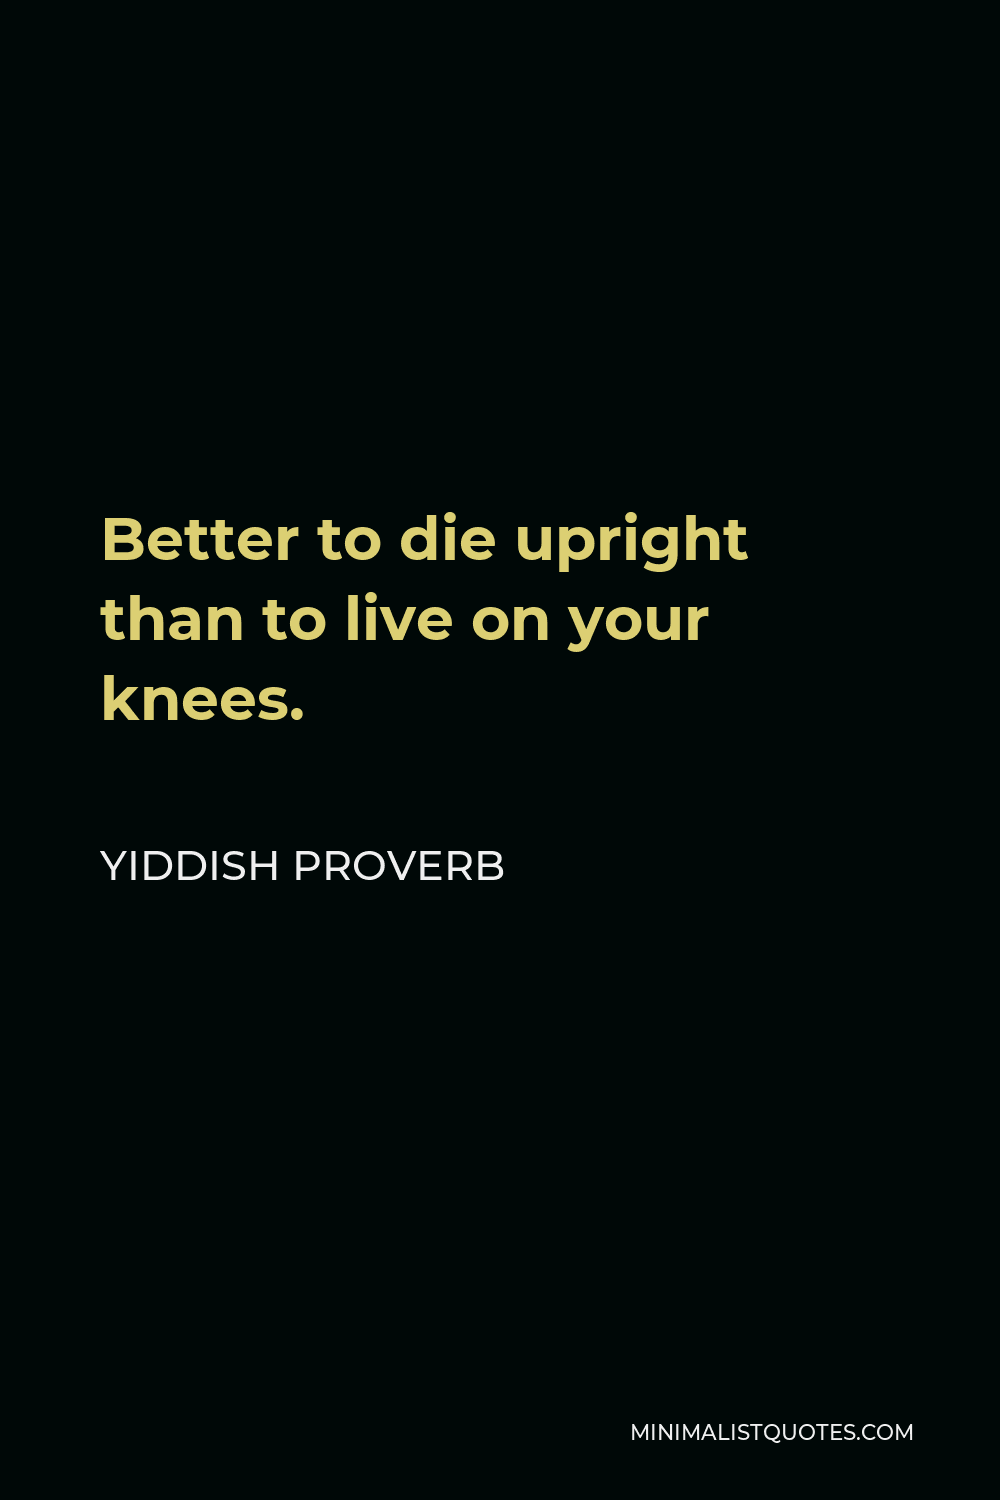 Yiddish Proverb Quote - Better to die upright than to live on your knees.